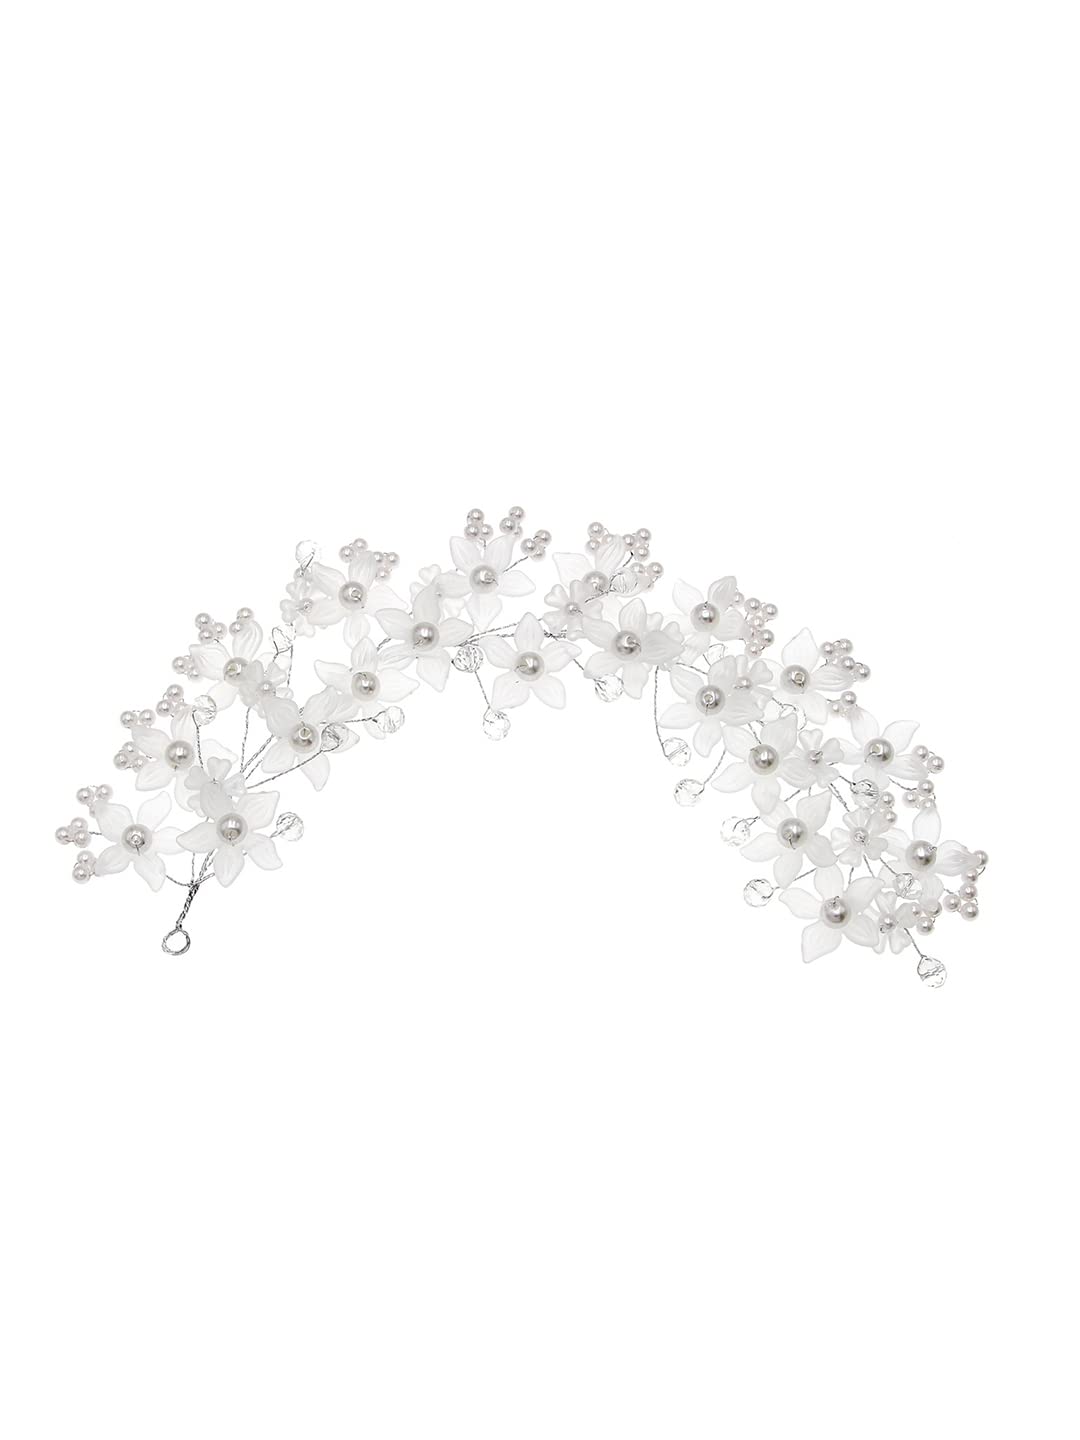 Yellow Chimes Bridal Hair Vine for Women and Girls Bridal Hair Accessories for Wedding Silver Headband Hair Accessories Wedding Jewellery for Women Floral Bridal Wedding Head band Hair Vine for Girls Headpiece